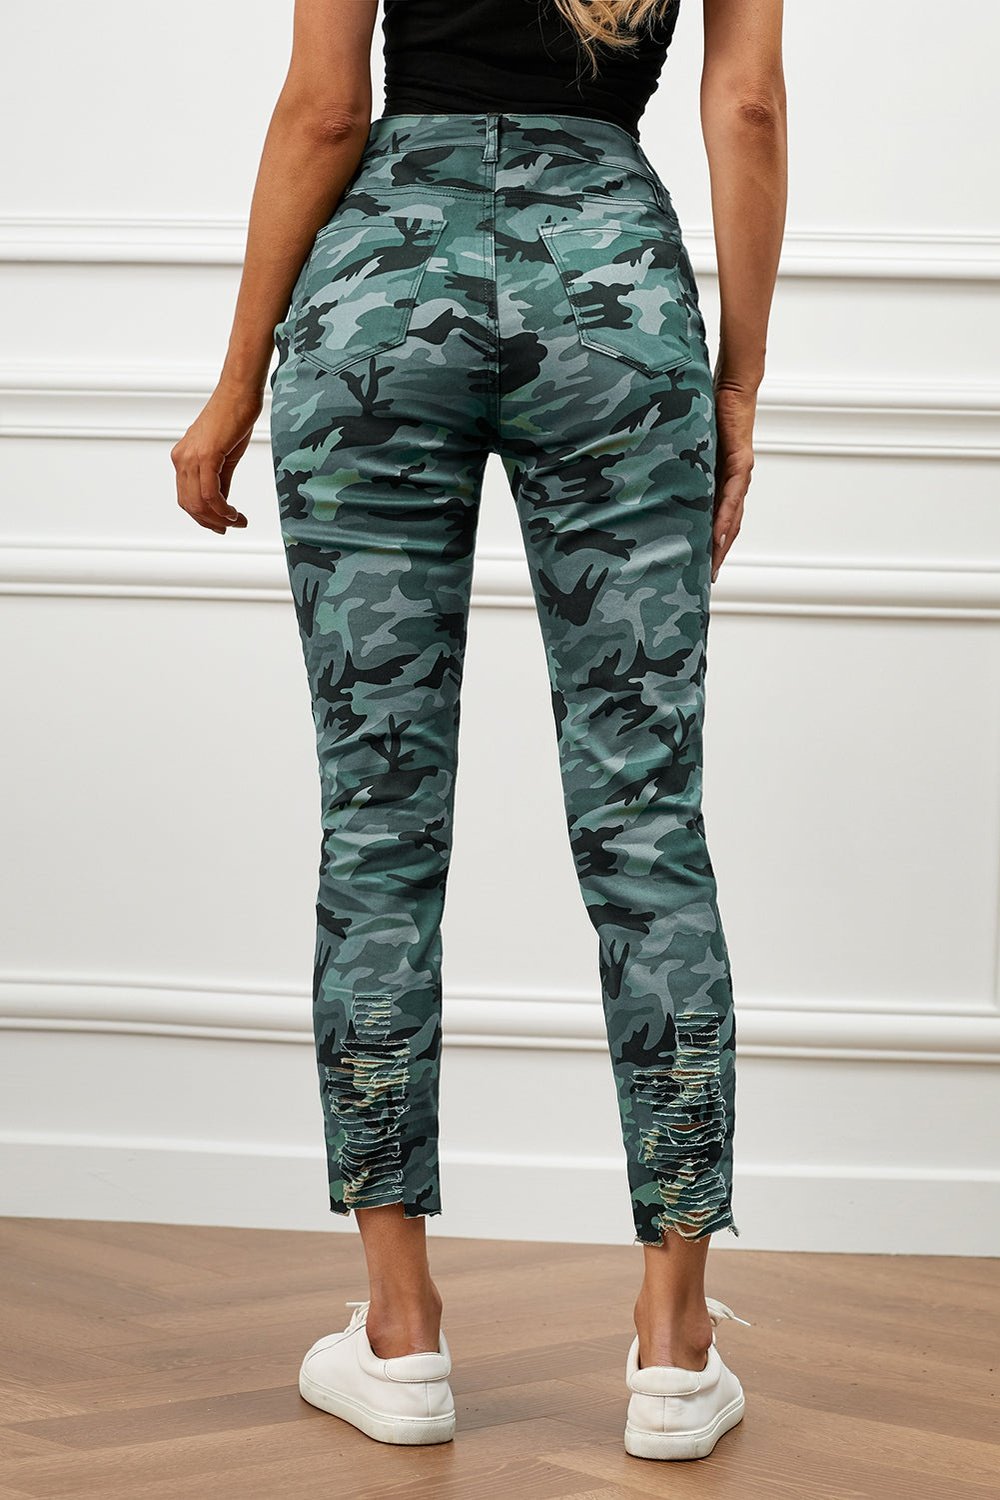 Distressed Camouflage Jeans - Jeans - FITGGINS